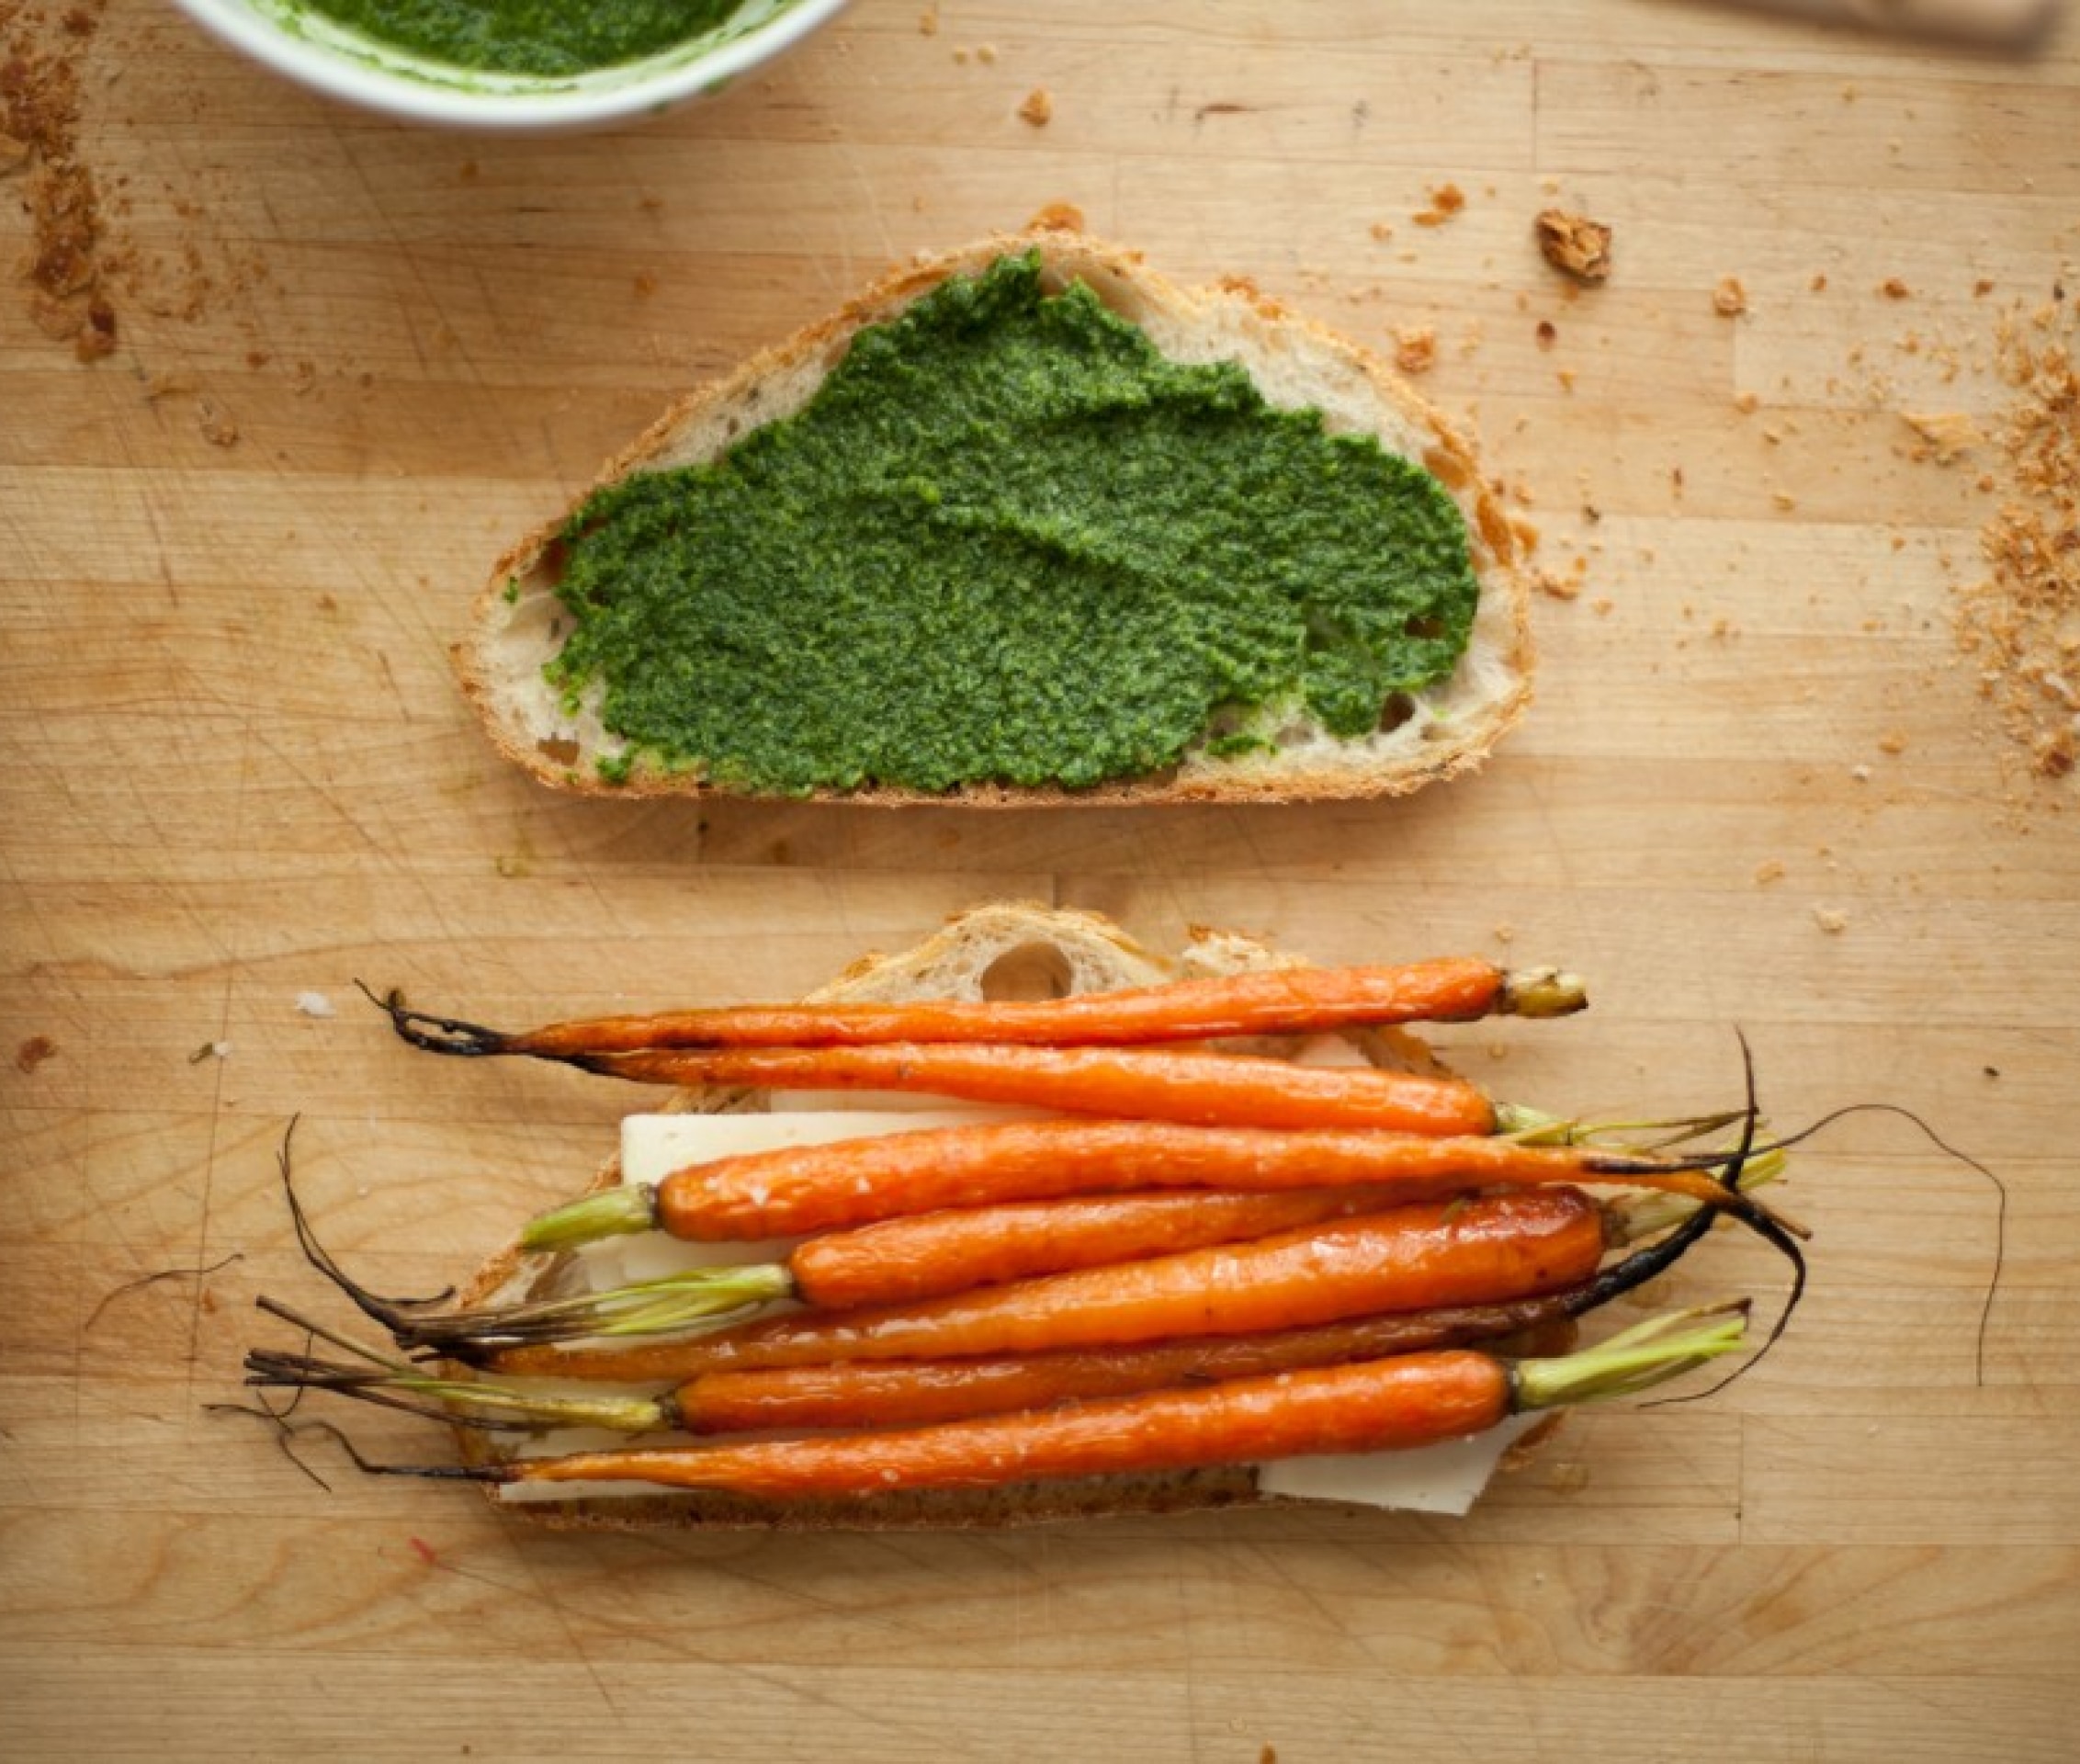 Image of Grilled Cheese with Roasted Carrots and Pesto